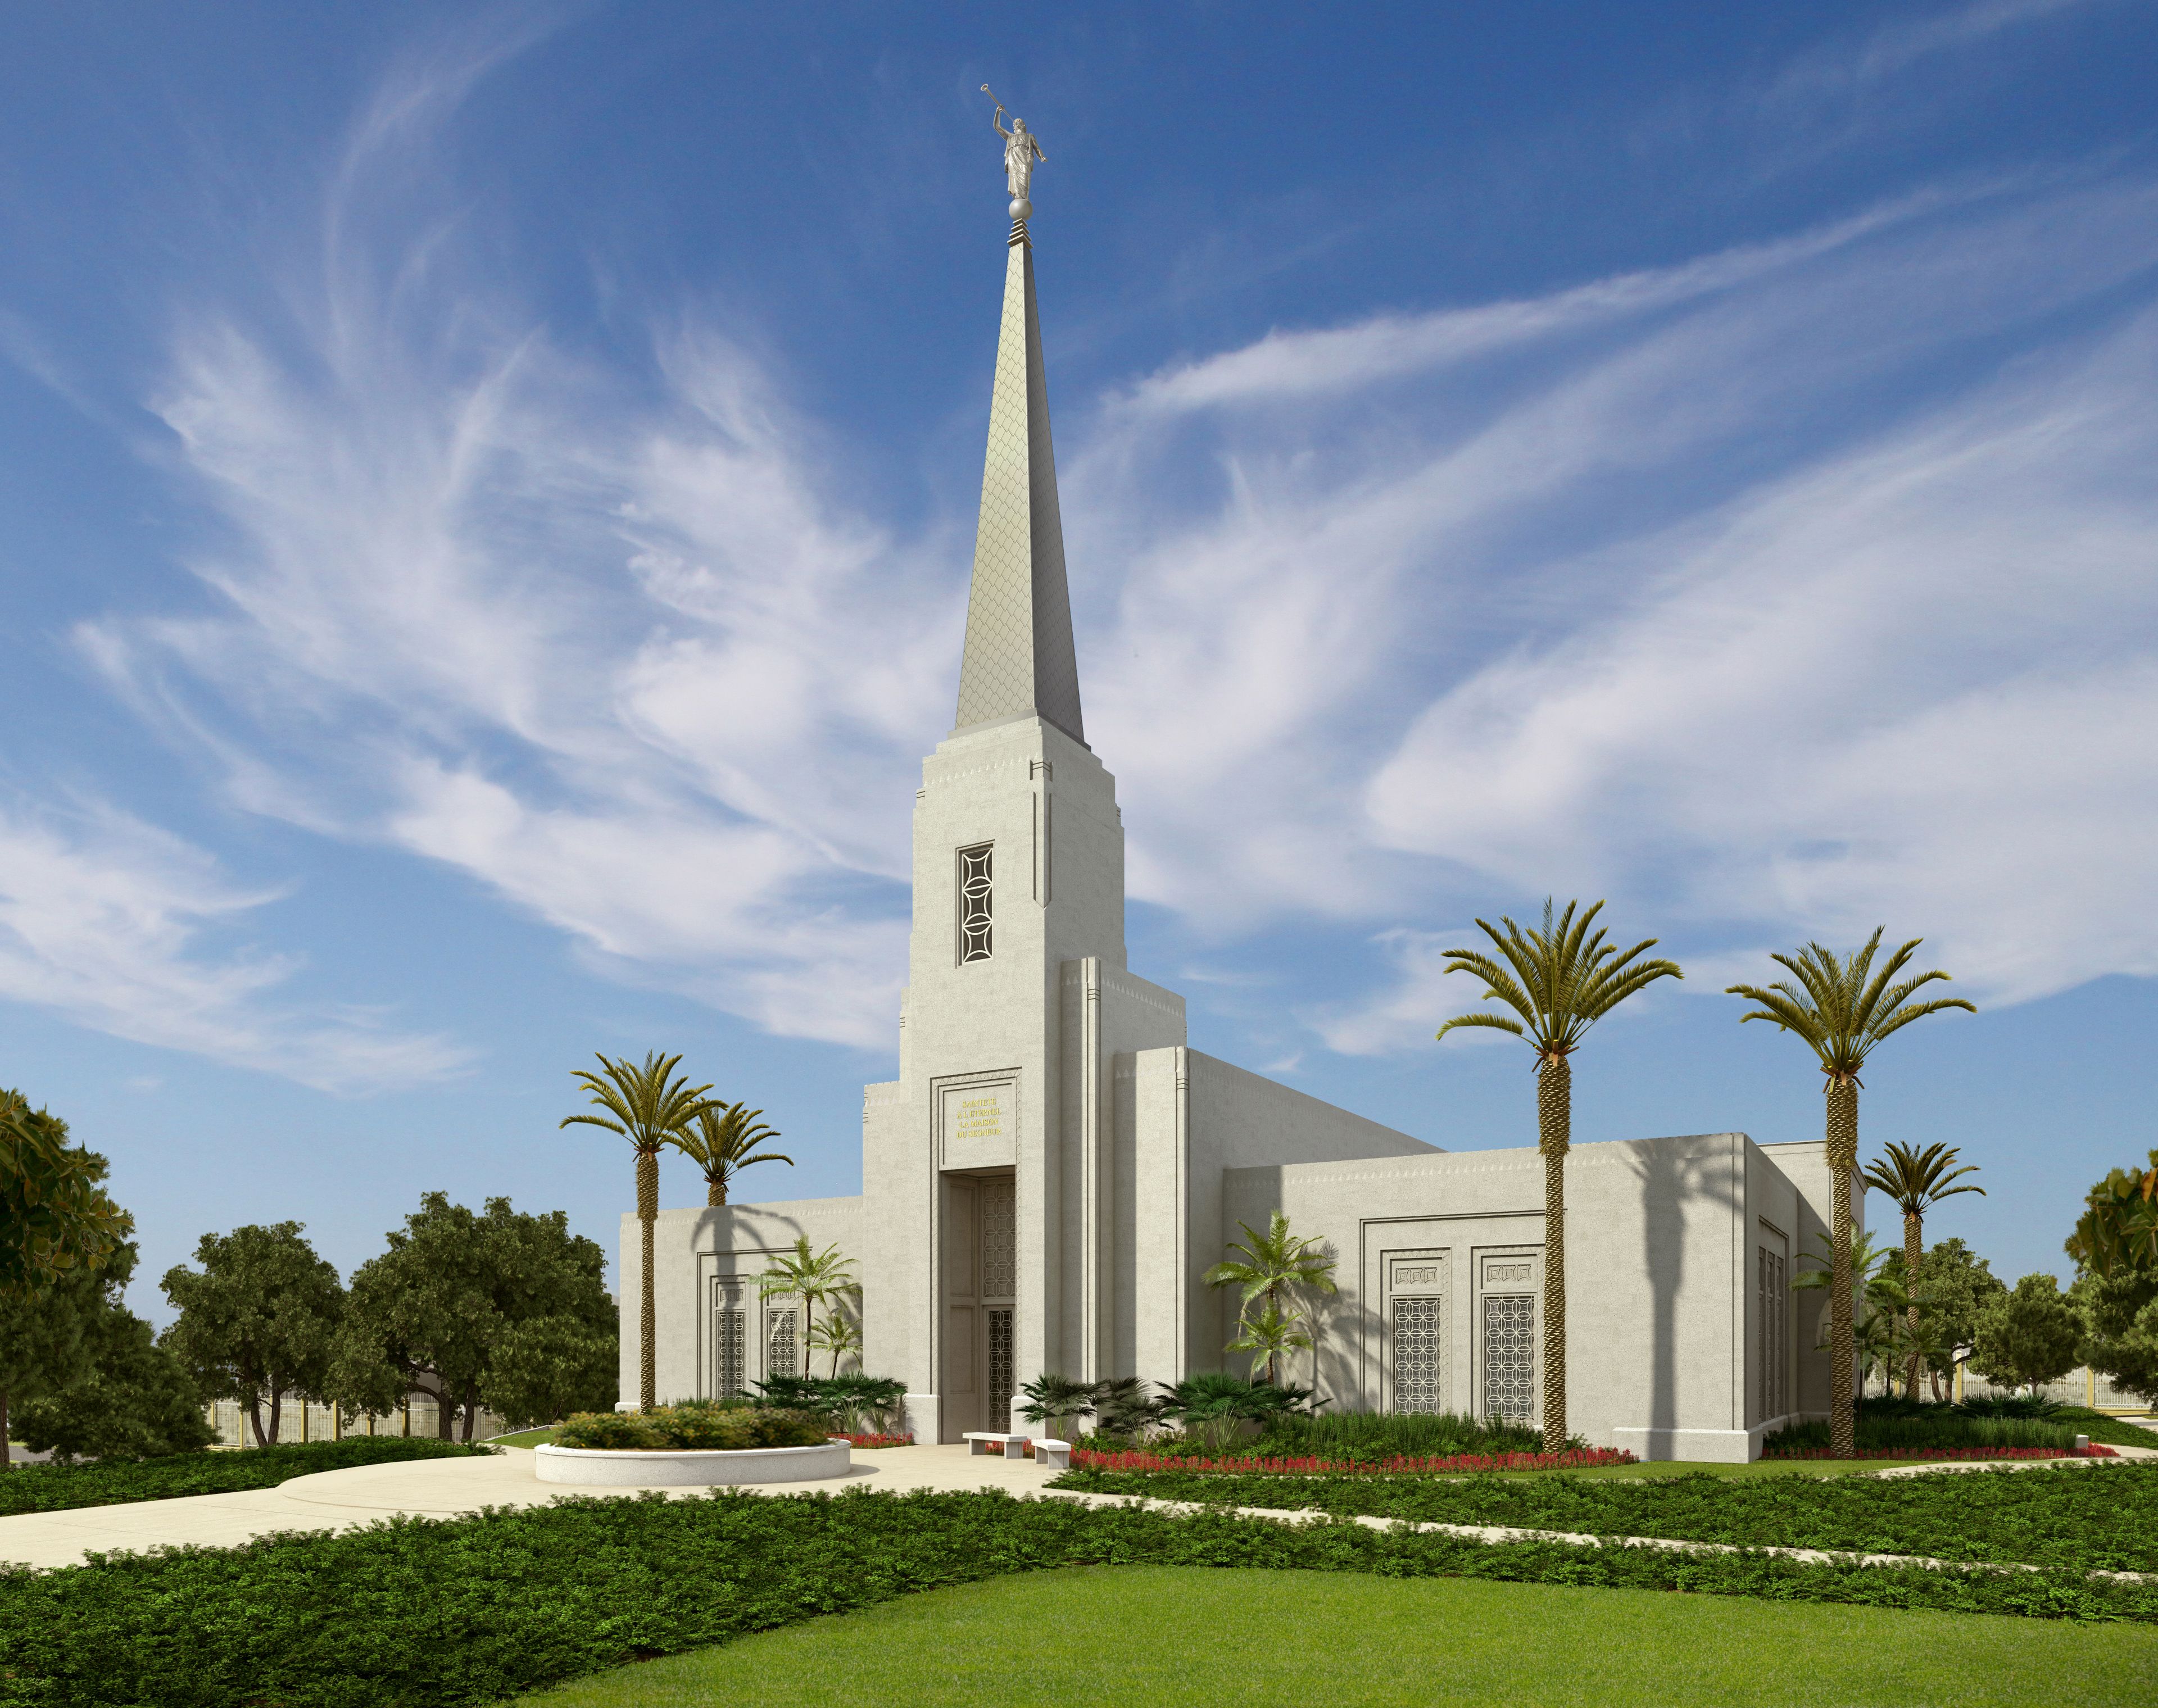 An artist’s rendering of the exterior of the Abidjan Ivory Coast Temple.